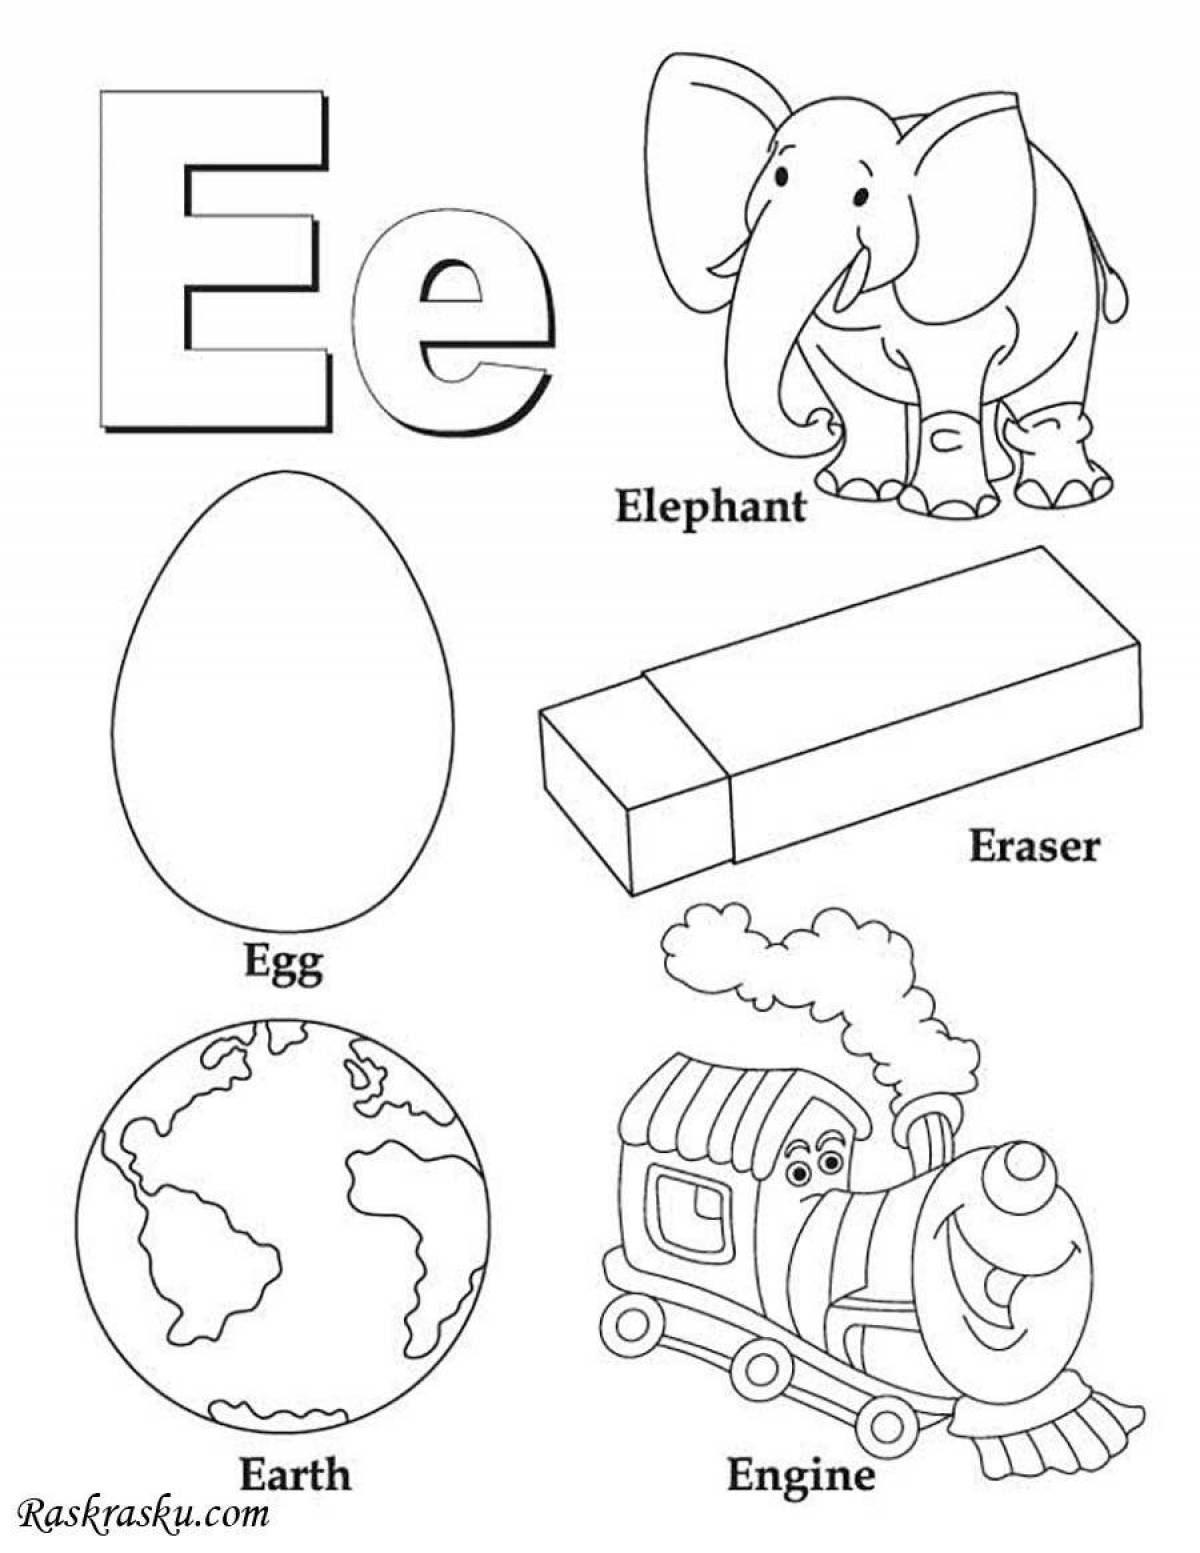 English alphabet in pictures #8